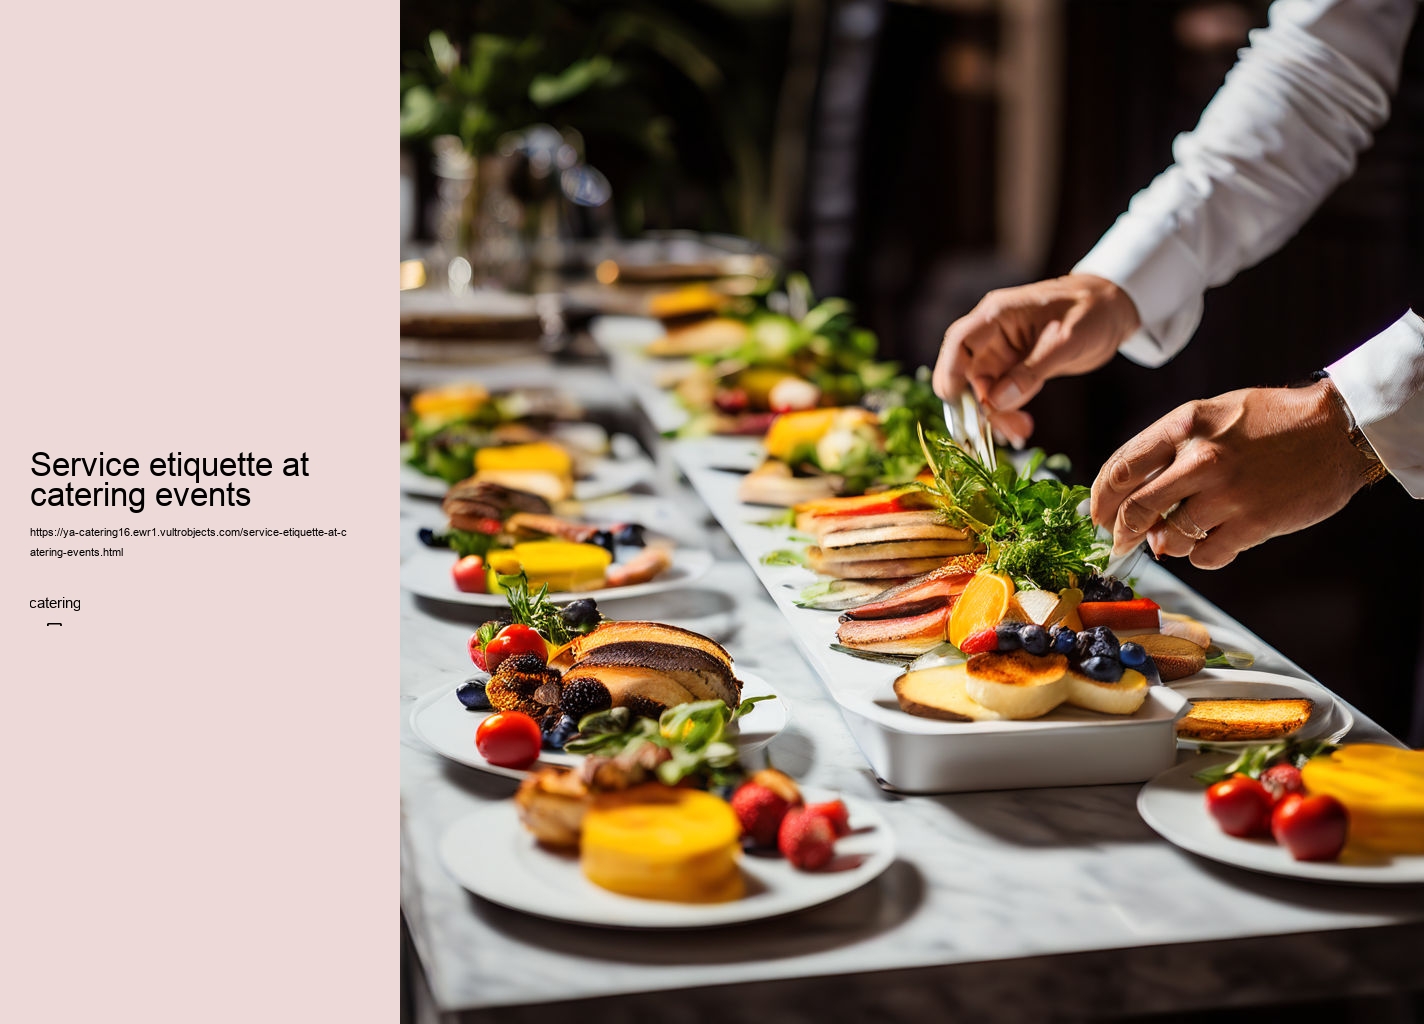 Service etiquette at catering events